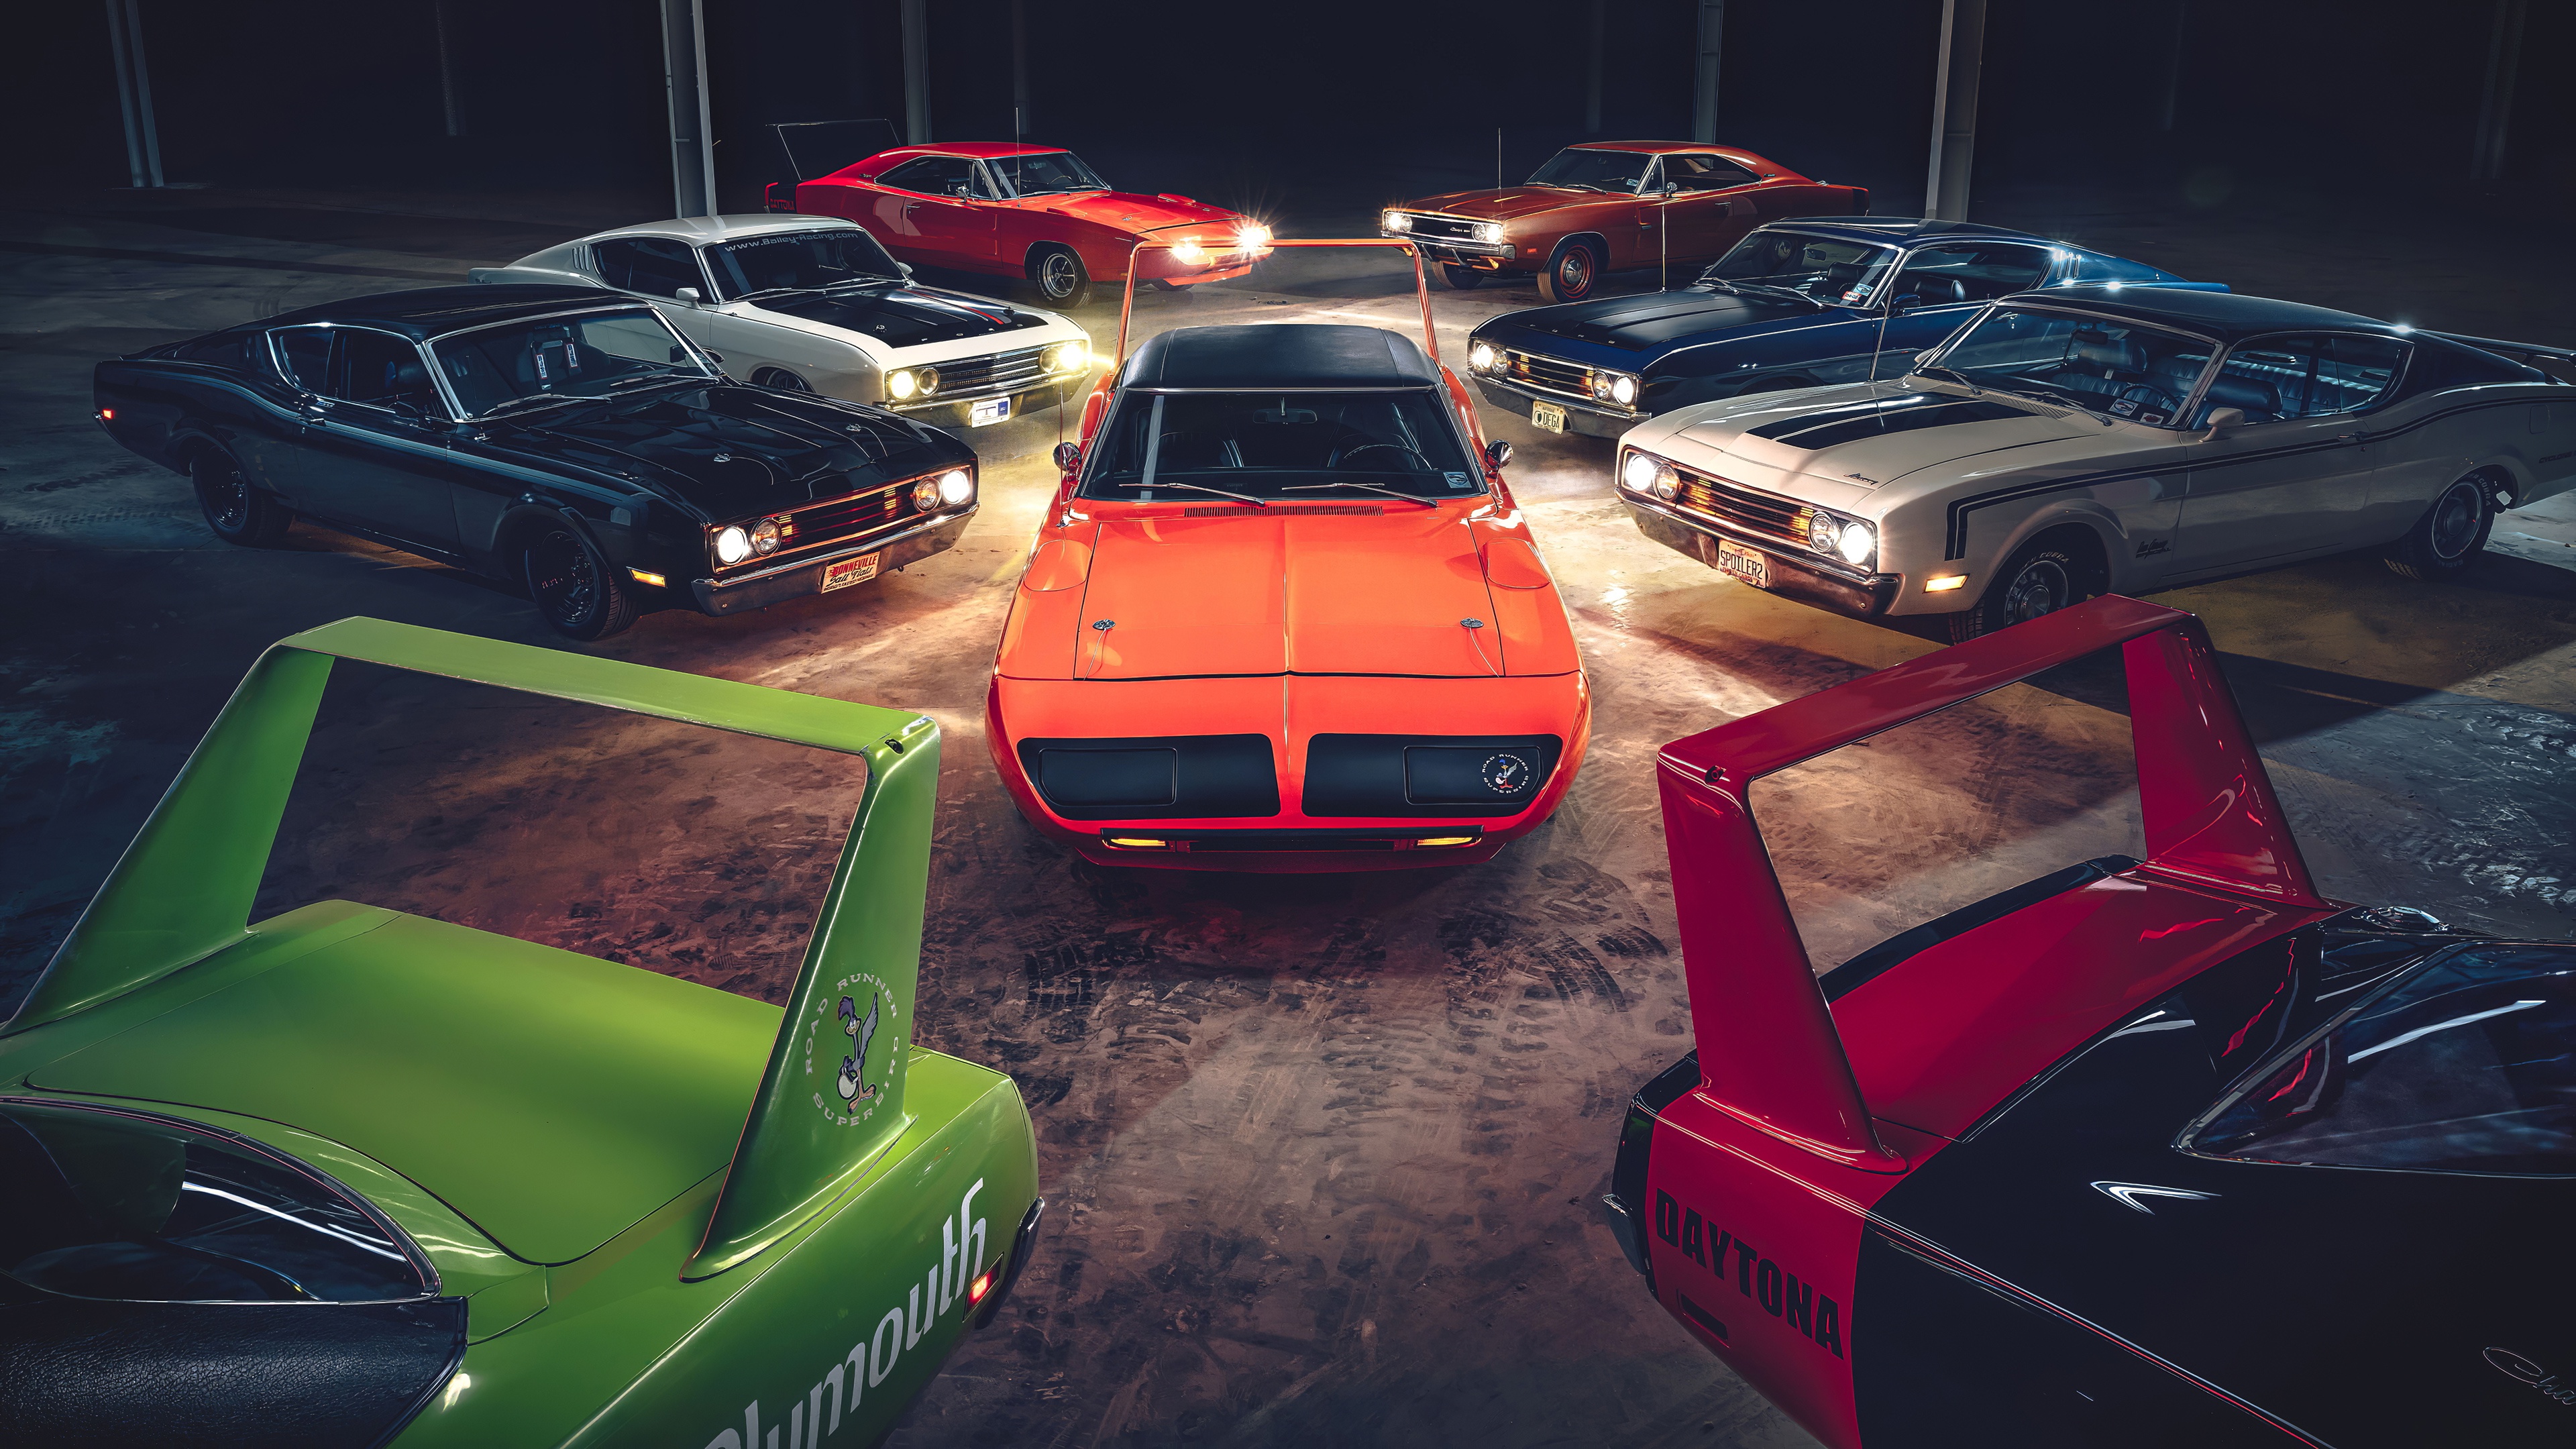 Vehicles Plymouth HD Wallpaper | Background Image